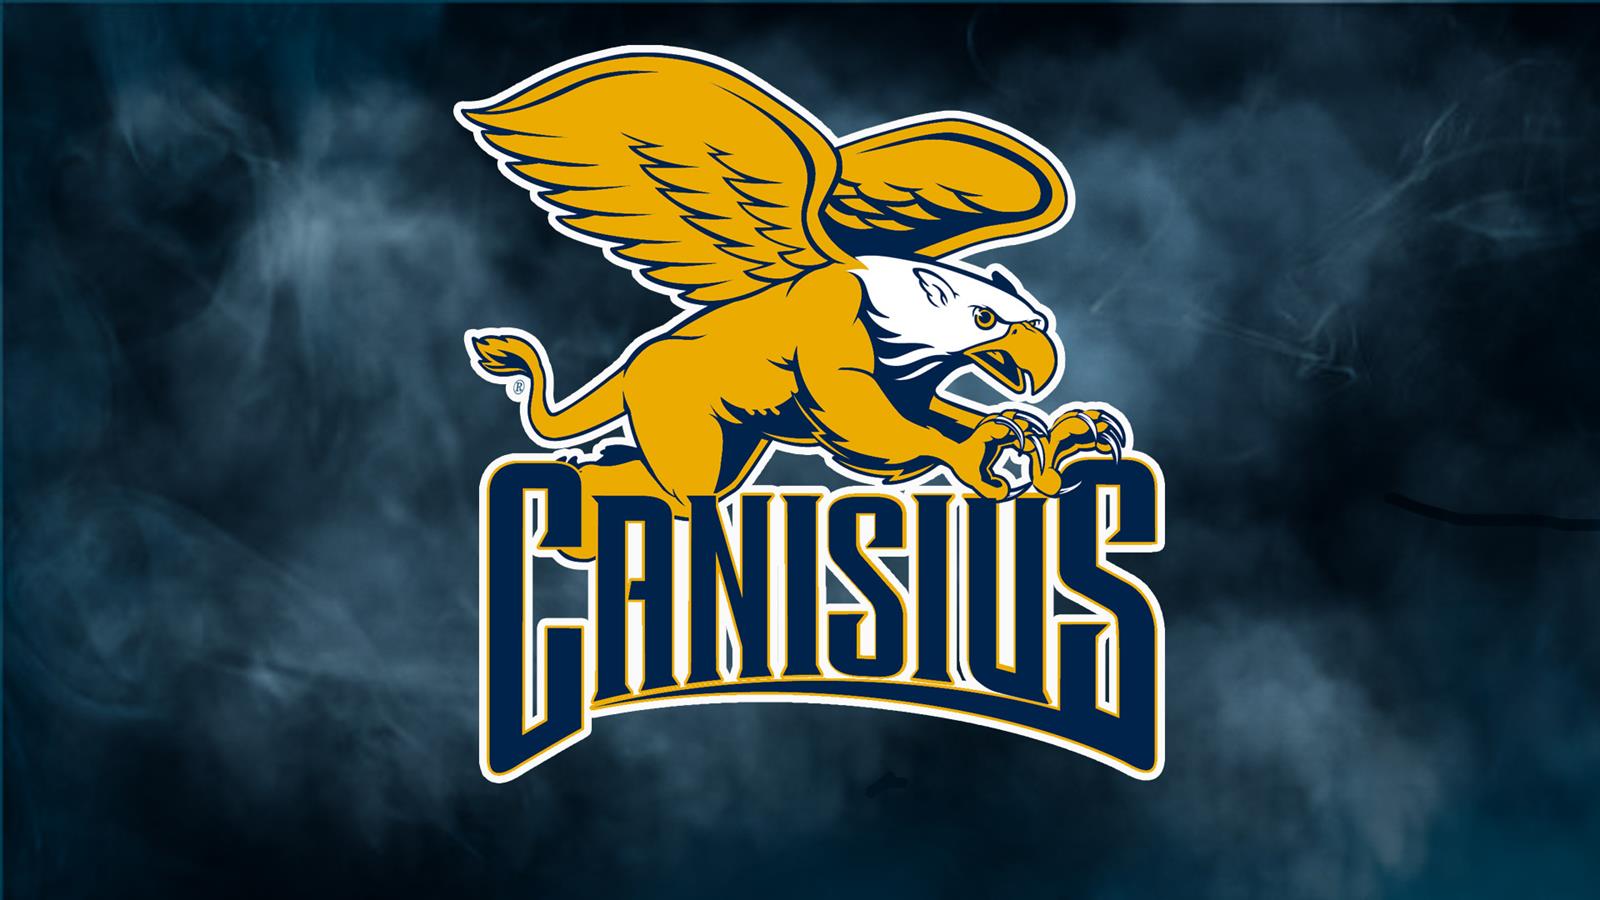 Canisius University Parts Ways with Head Coach Witherspoon: Search for New Basketball Coach Begins